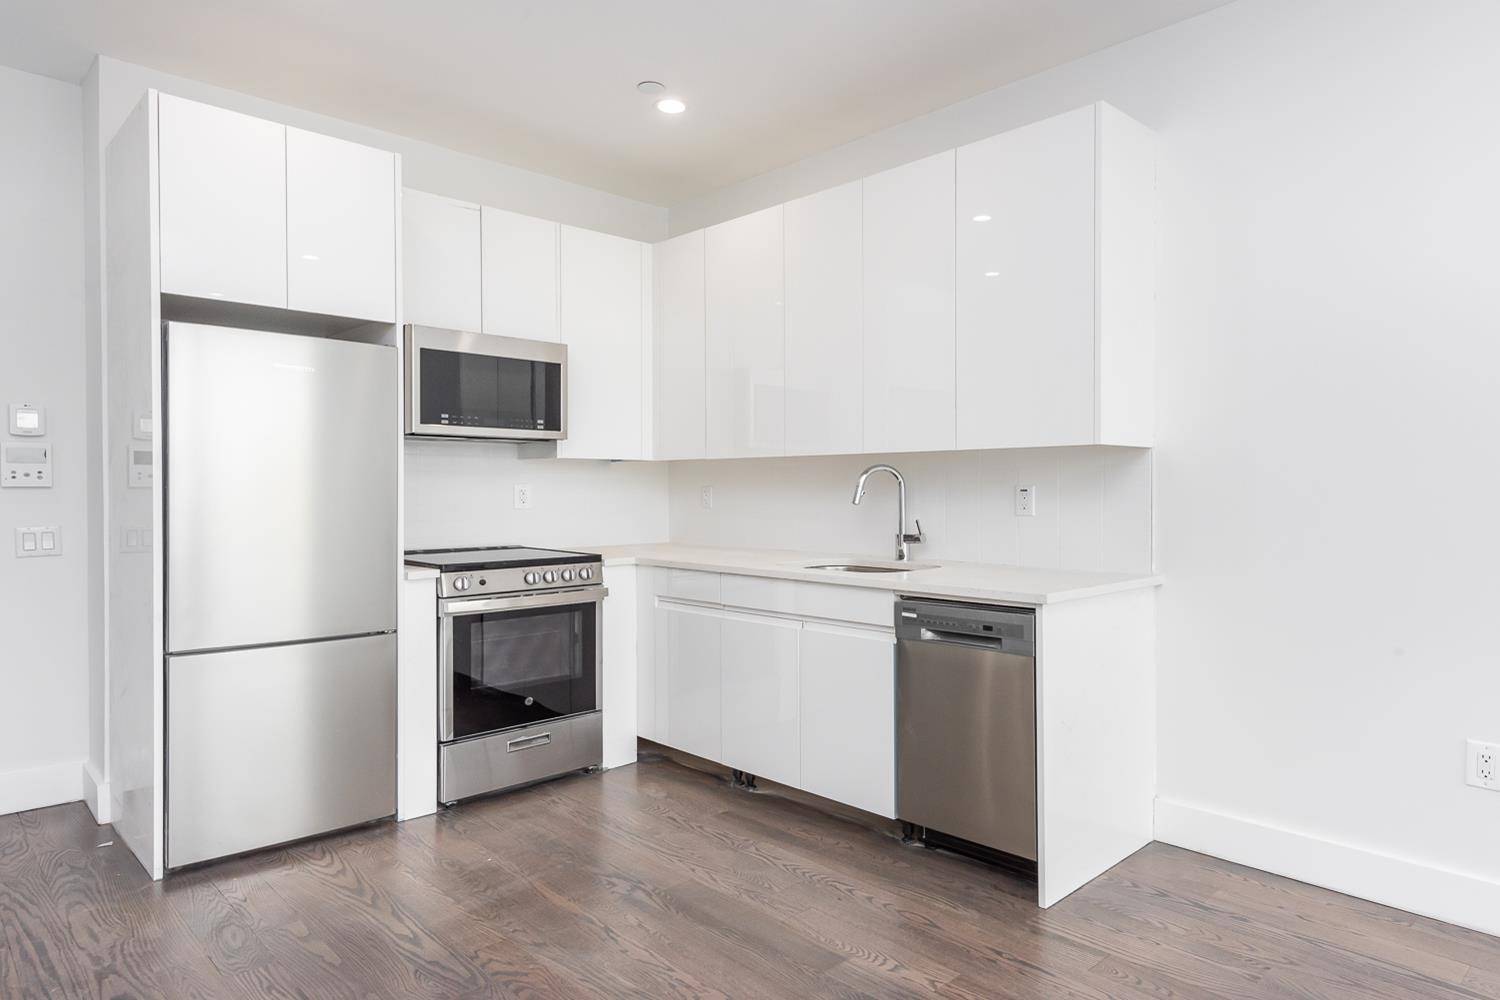 23 71 is situated in a prime spot of Astoria, minutes from the Ditmars or Astoria Blvd station.